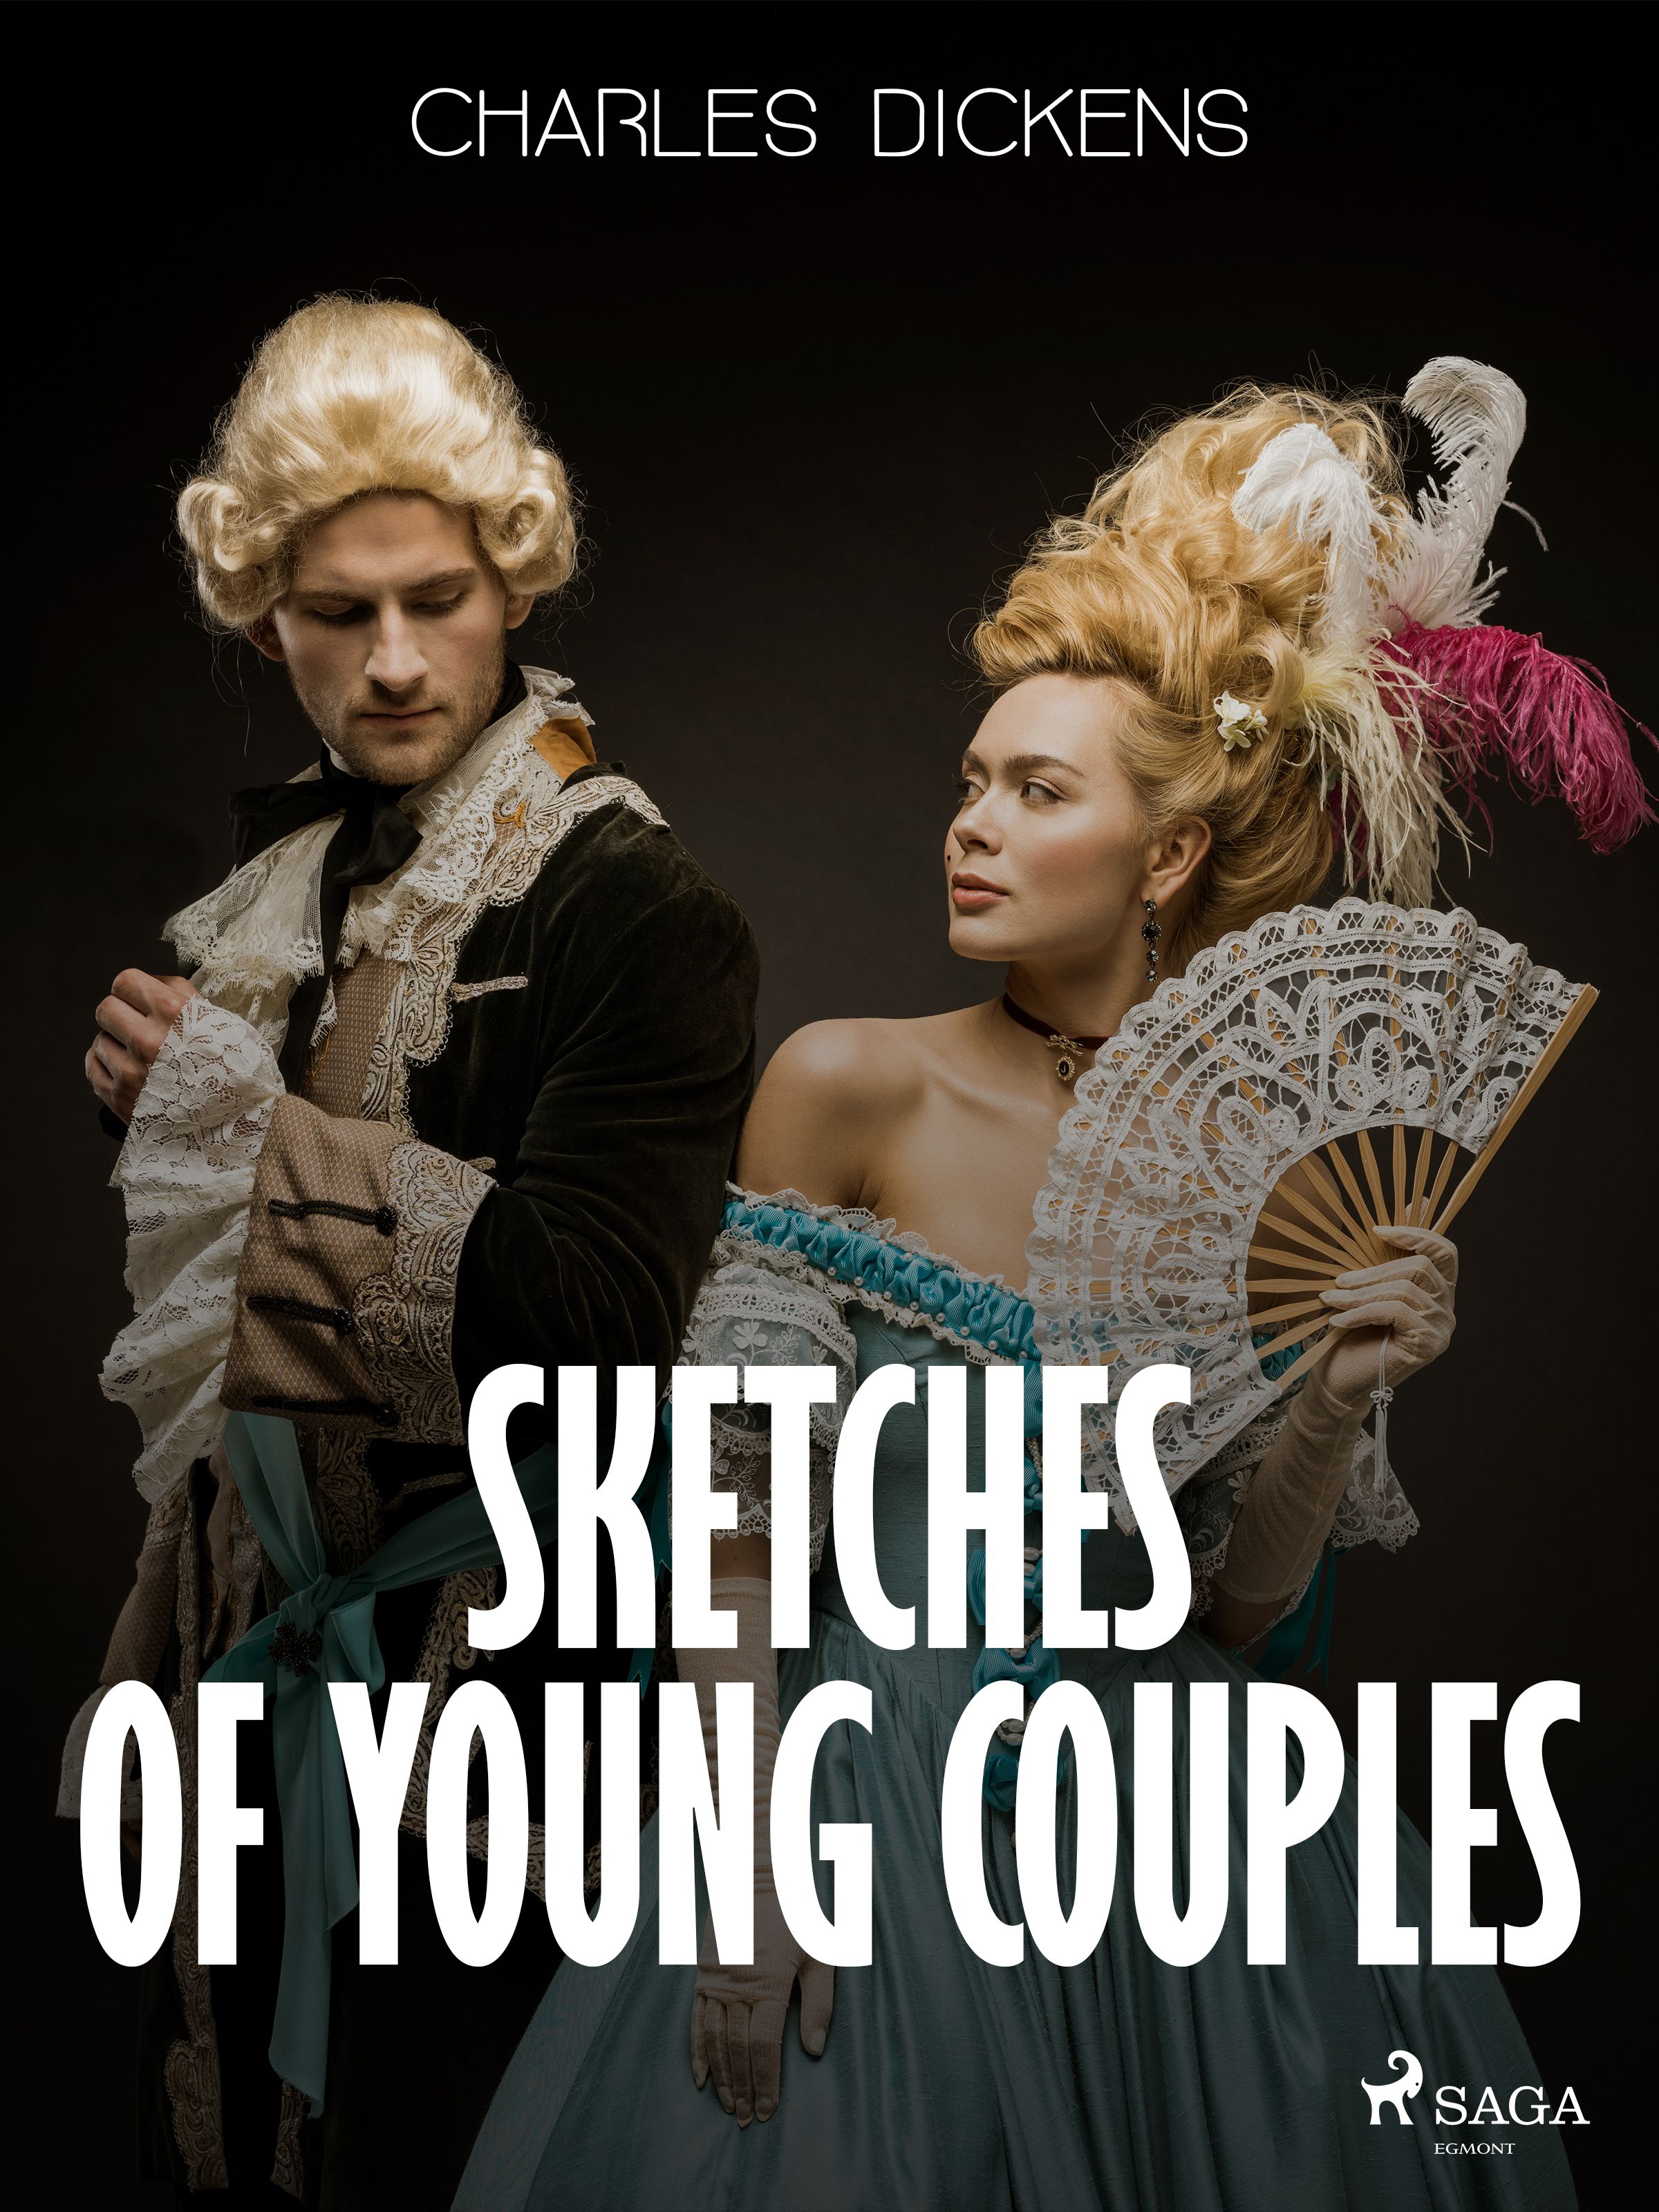 Sketches of Young Couples, e-bok av Charles Dickens